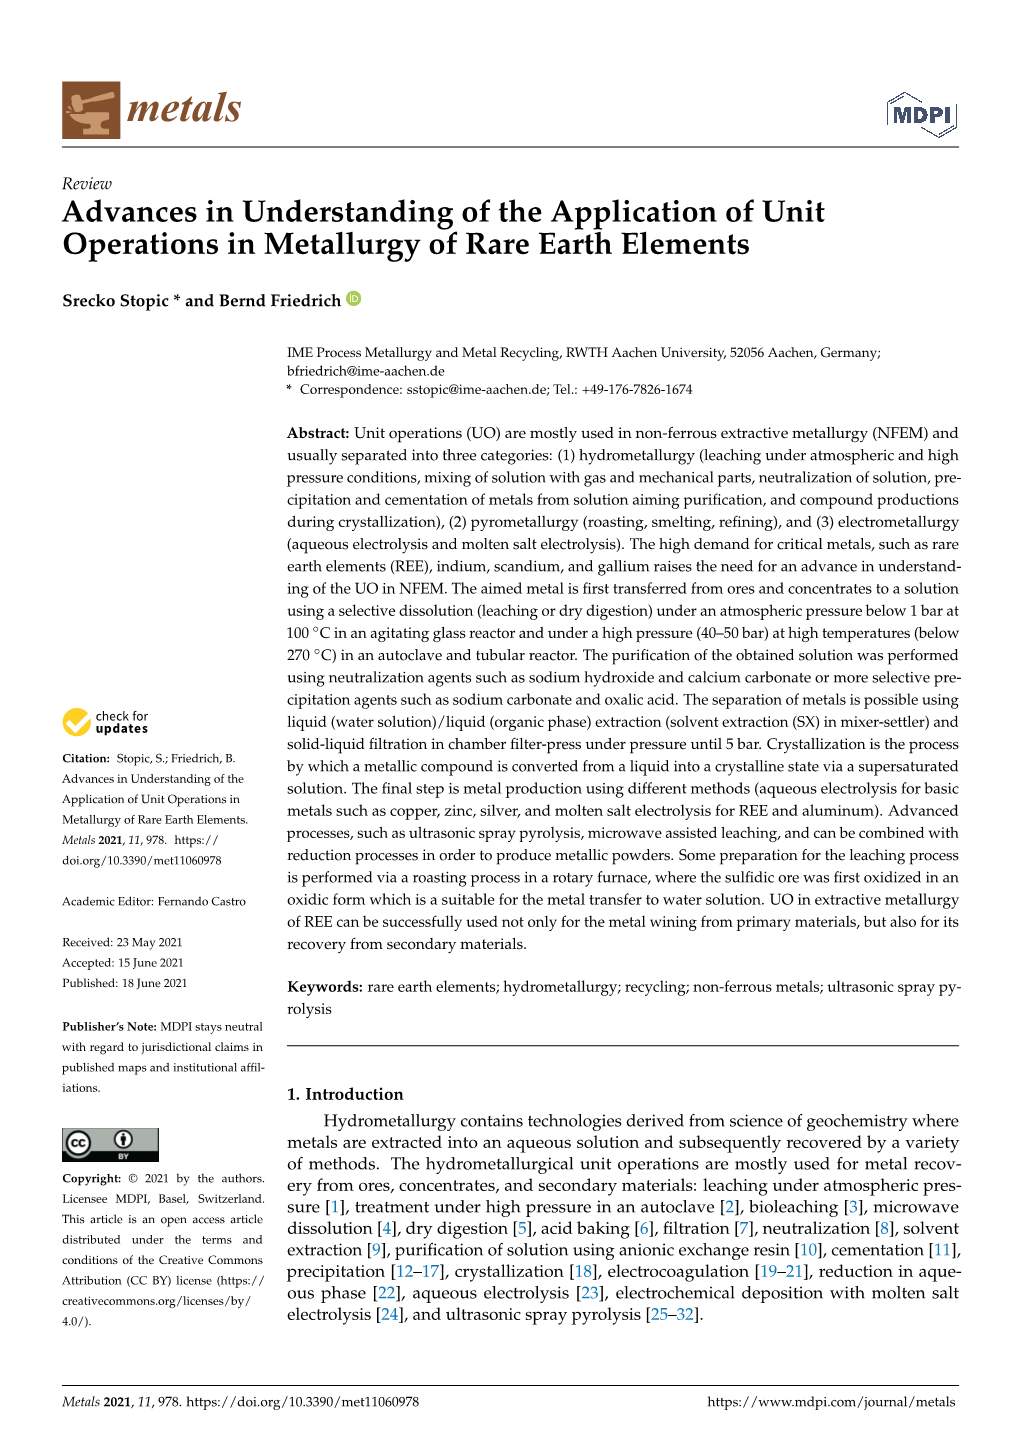 Advances in Understanding of the Application of Unit Operations in Metallurgy of Rare Earth Elements